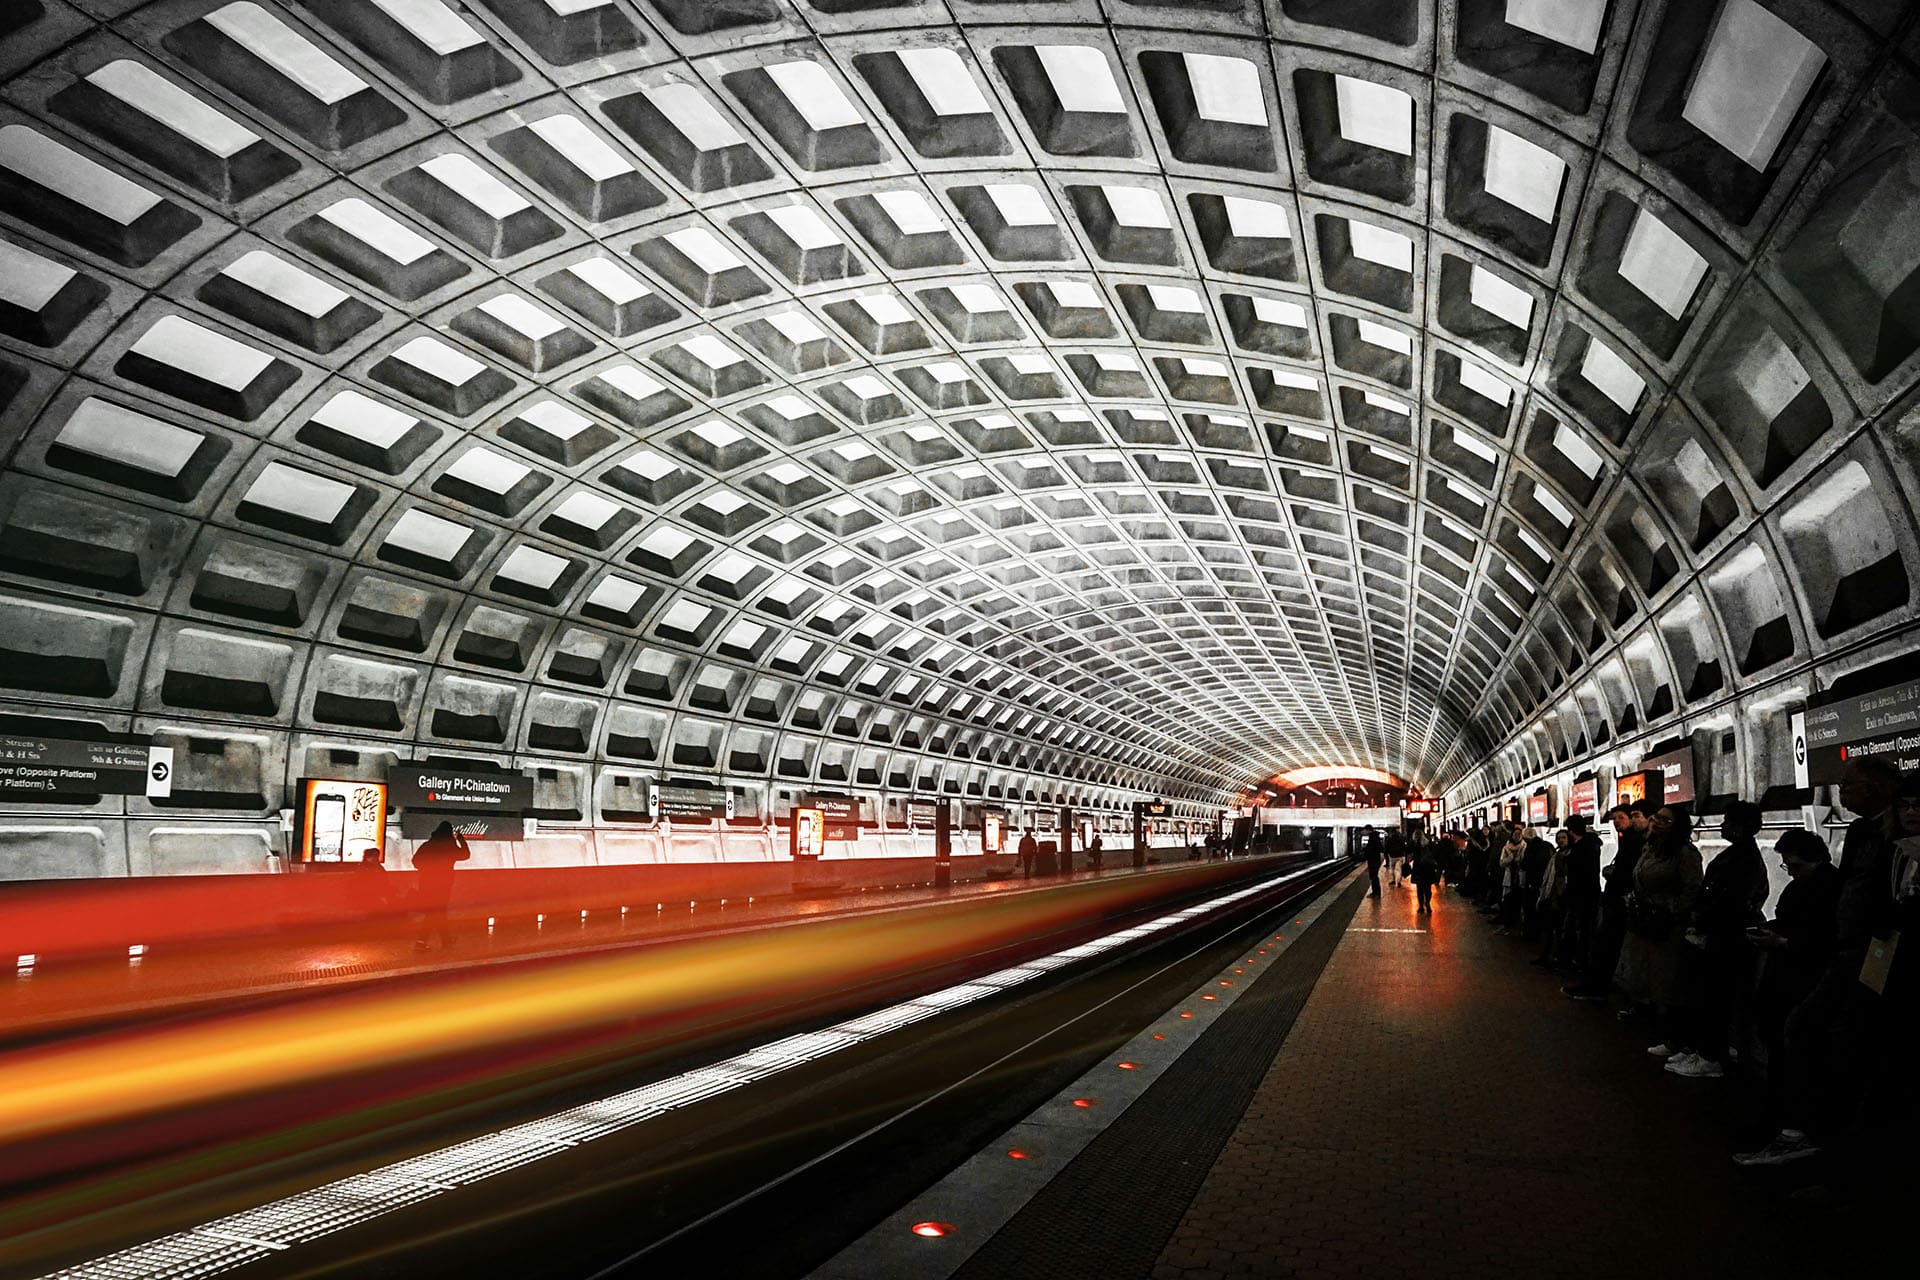 A bustling, futuristic metro station with an arched, geometric ceiling. People wait on the platform as a train, captured in motion, blurs by in vibrant streaks of red and yellow. The lighting and architecture create a modern, dynamic atmosphere.